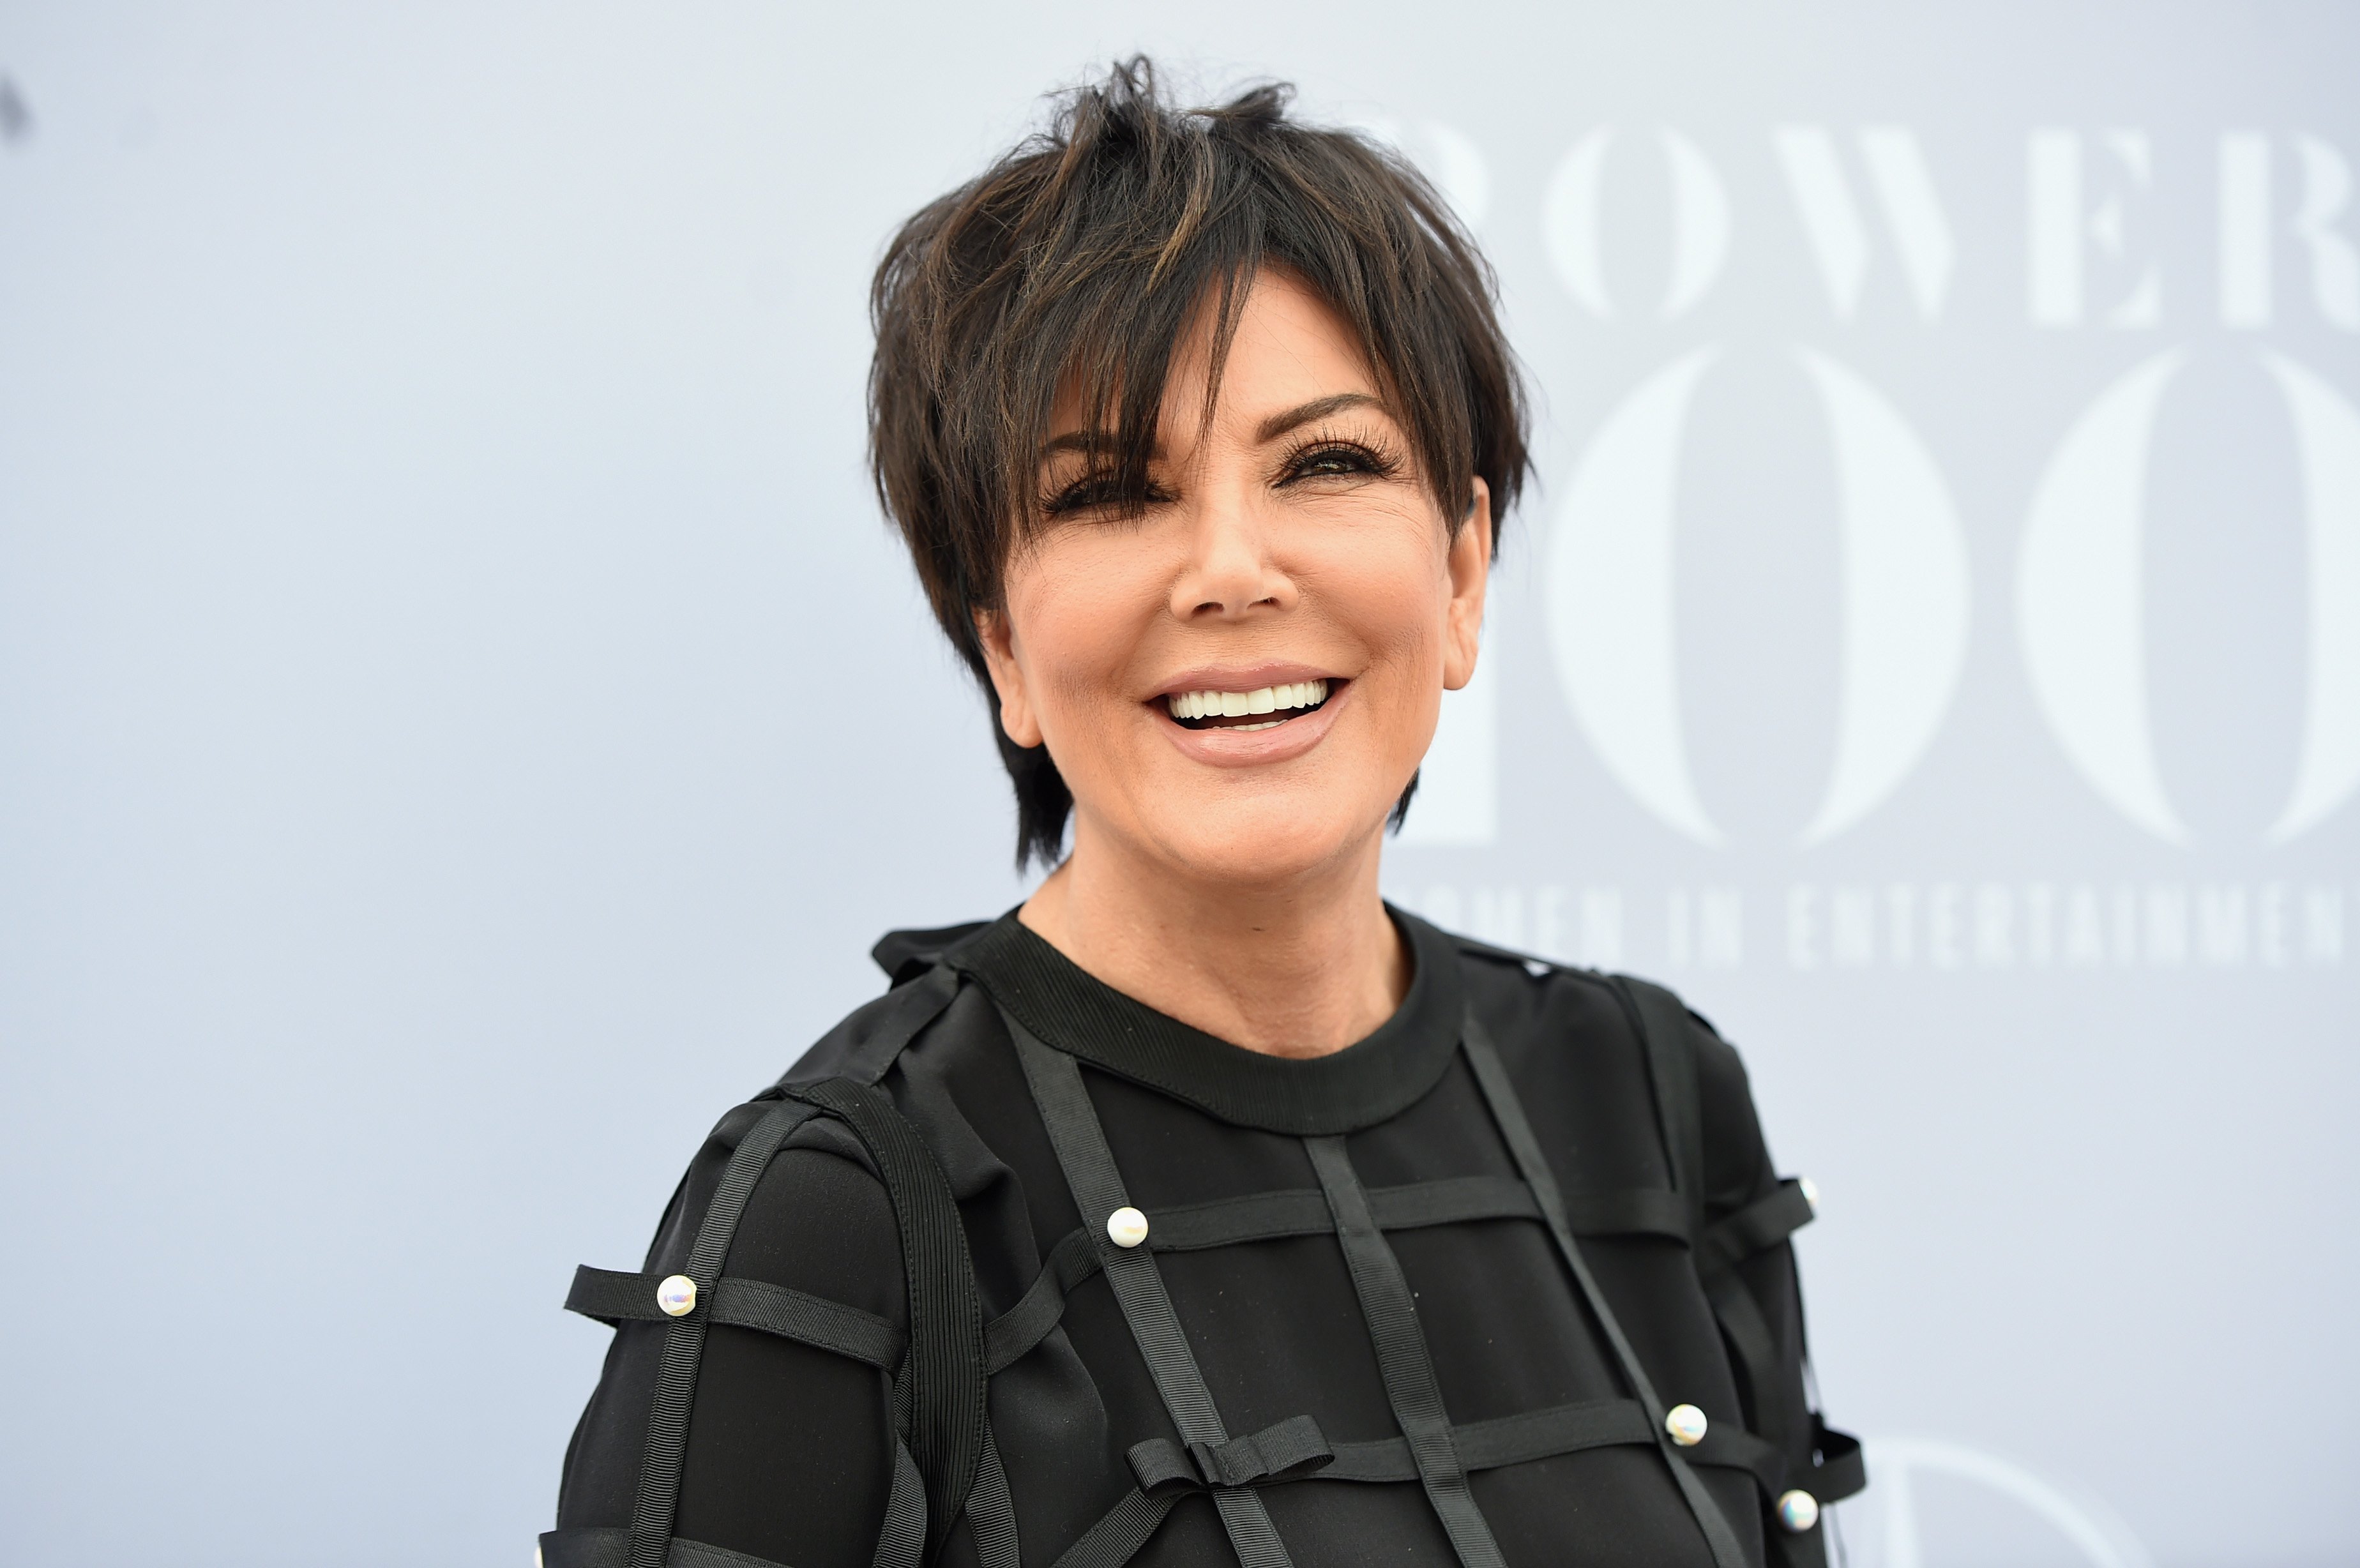 Kris Jenner attends The Hollywood Reporter's 24th annual Women in Entertainment Breakfast on December 9, 2015, at Milk Studios in Los Angeles, California. | Source: Getty Images